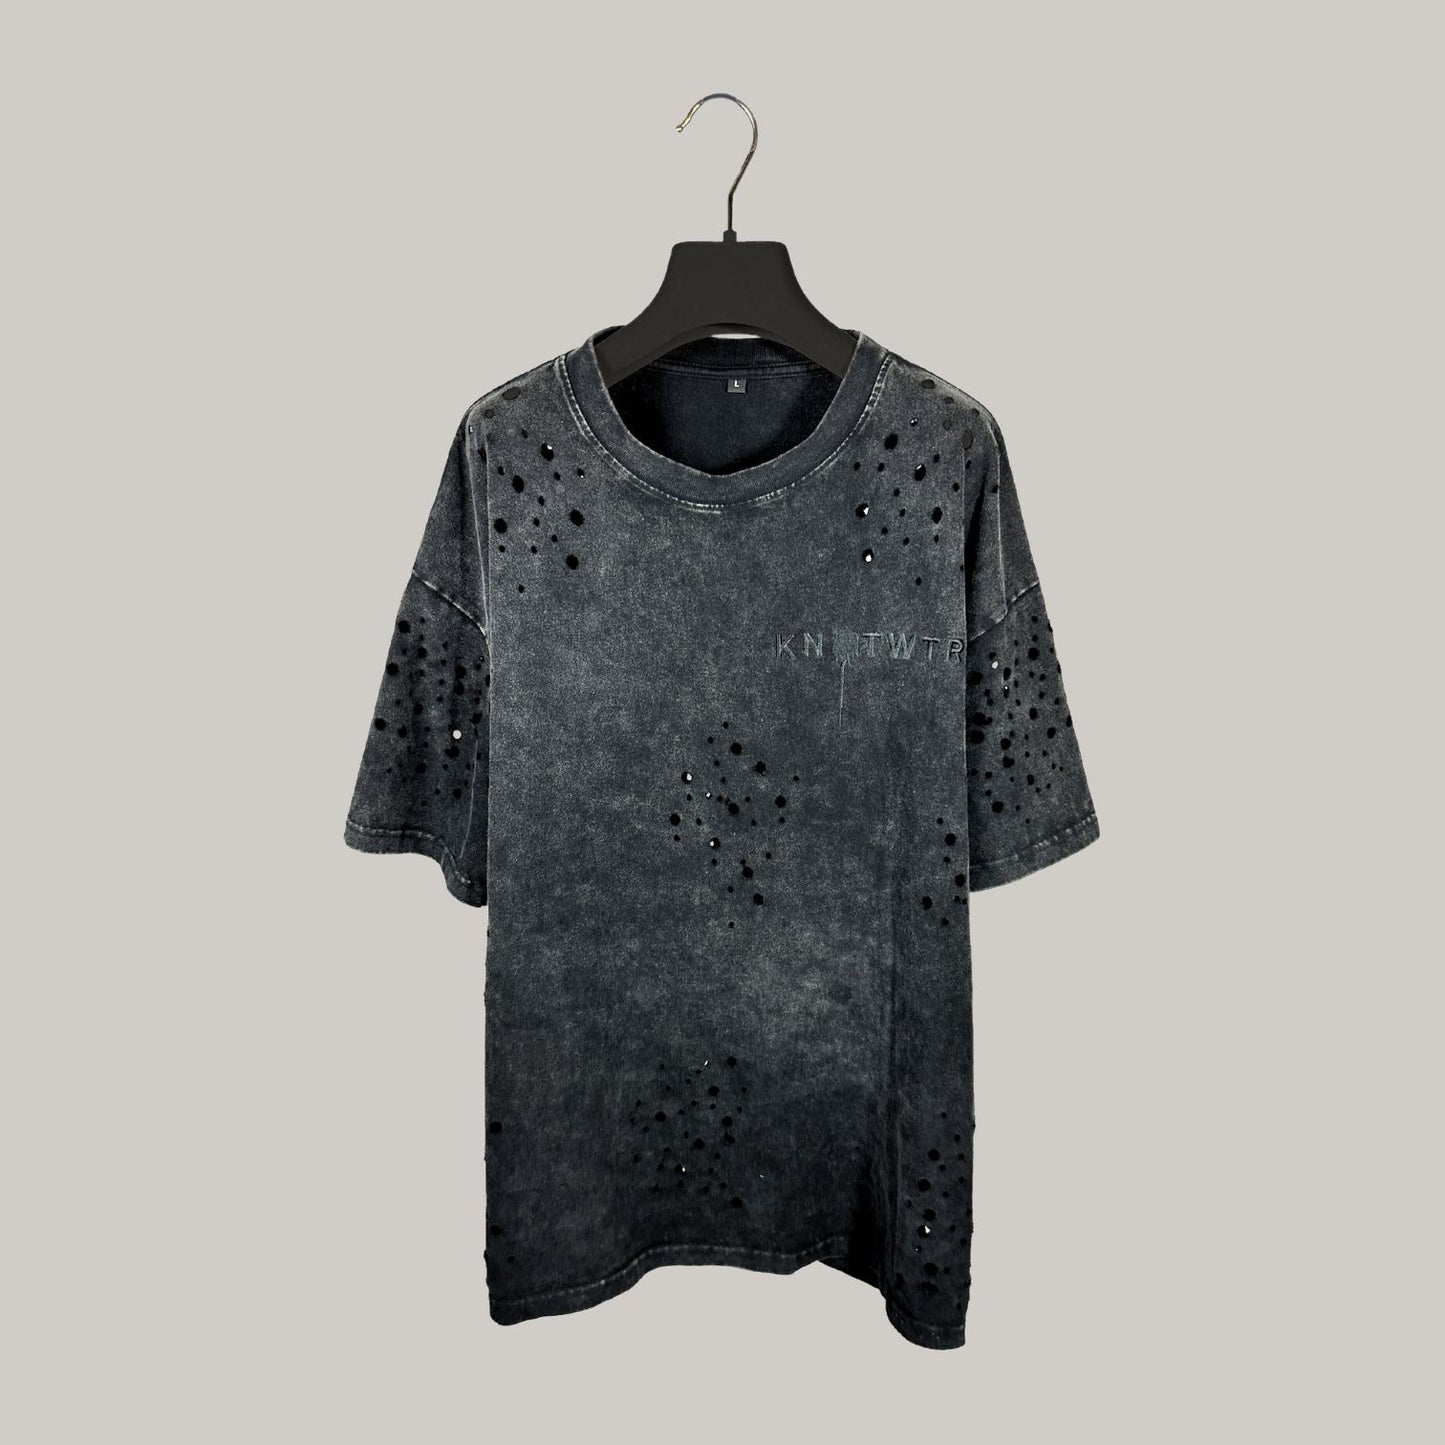 KNOTWTR: DISTRESSED HEAVY WEIGHT TEE